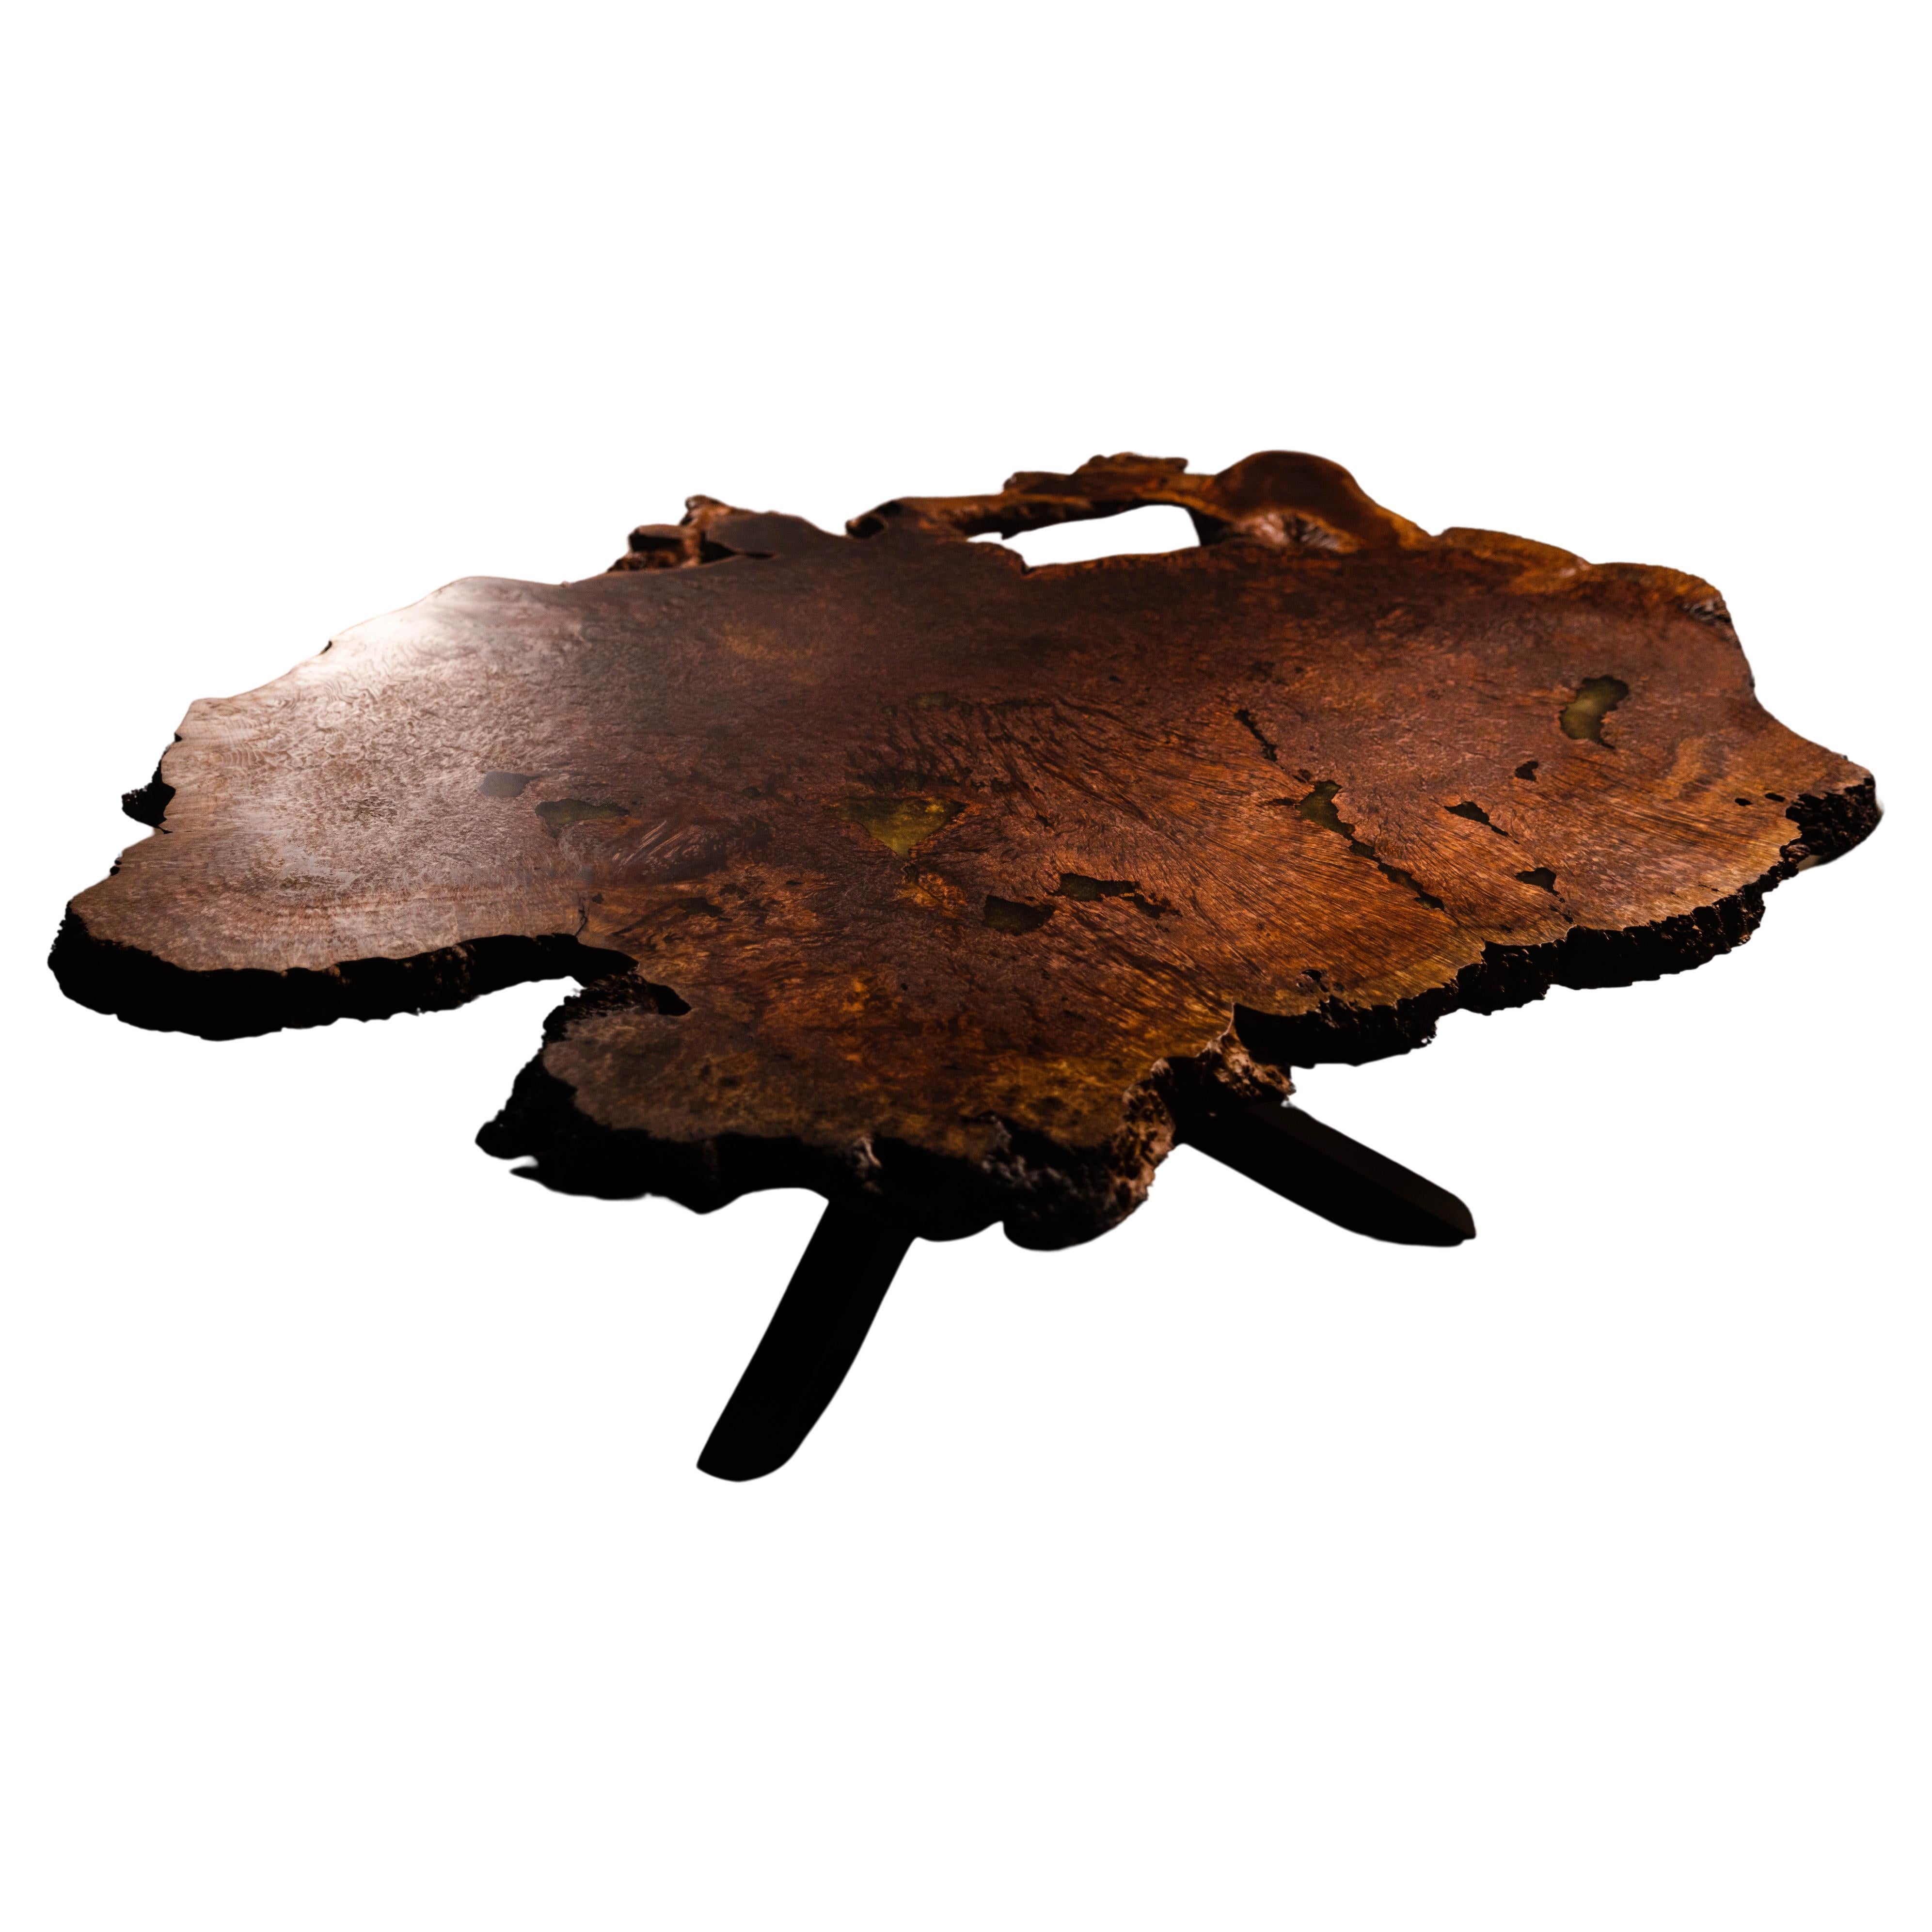 This coffee table features a slab of Redwood burl sourced from Northern California. Burls are a growth caused by a tree’s response to stress, injury, or infection. This particular species.  Sequoia sempervirens are prized for their stunning pattern,